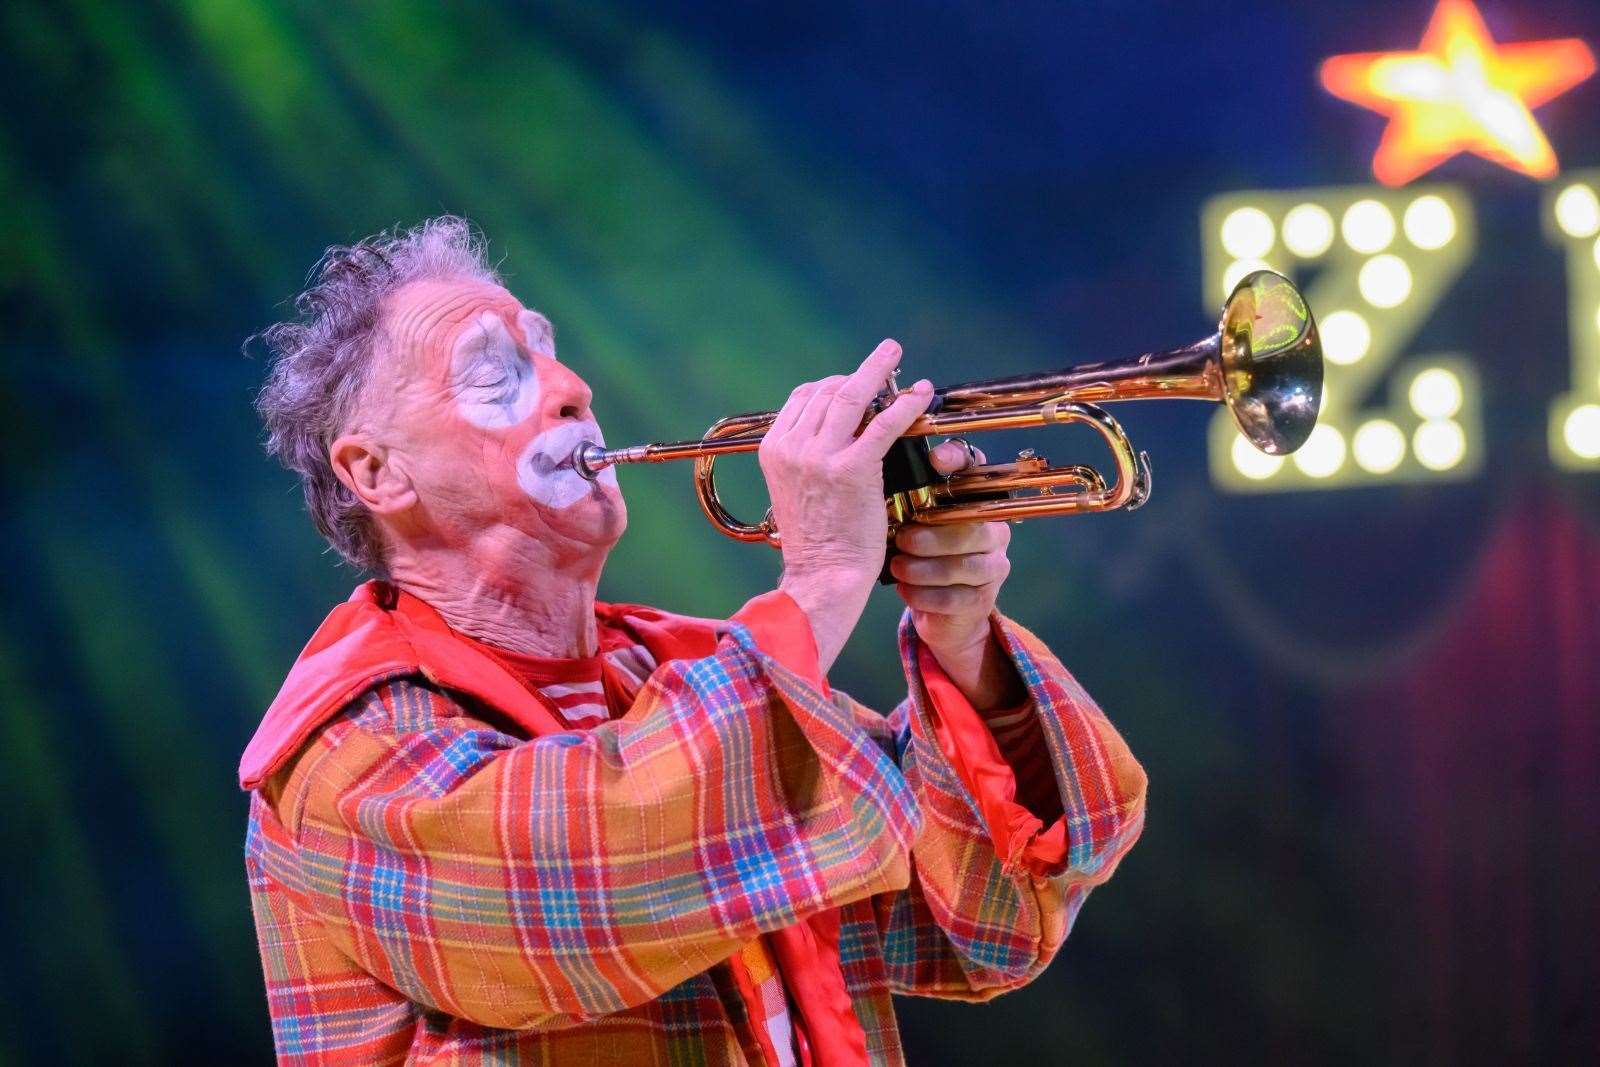 Whimmie Walker doesn't like to blow his own trumpet too much. Picture: Piet-Hein